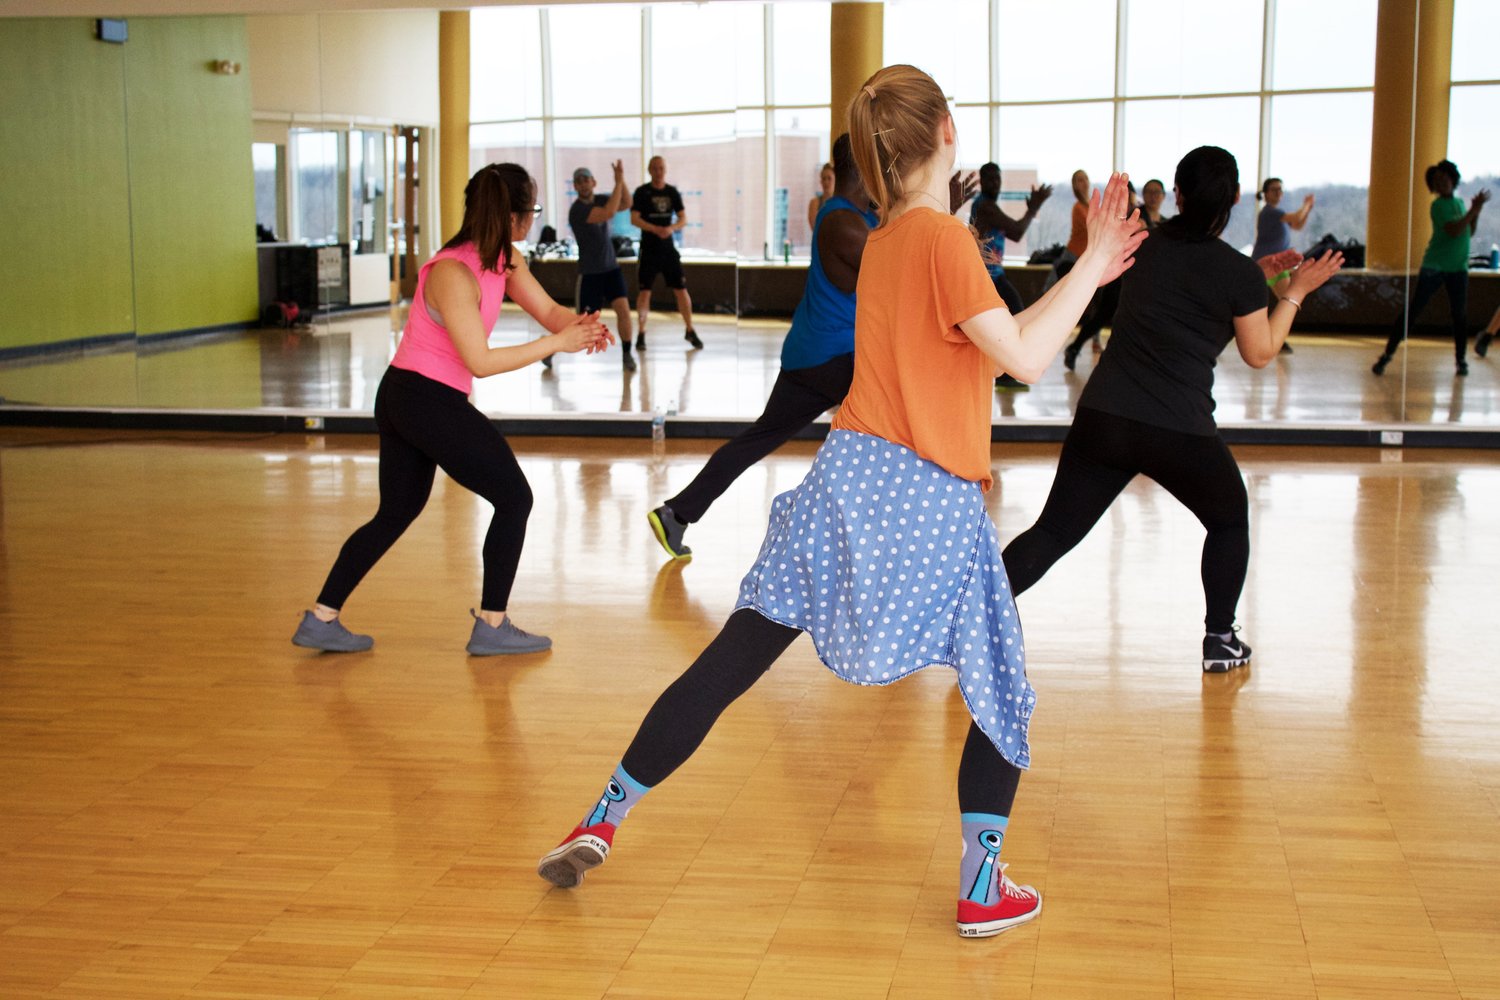 A group of people participating in a jazzercise class